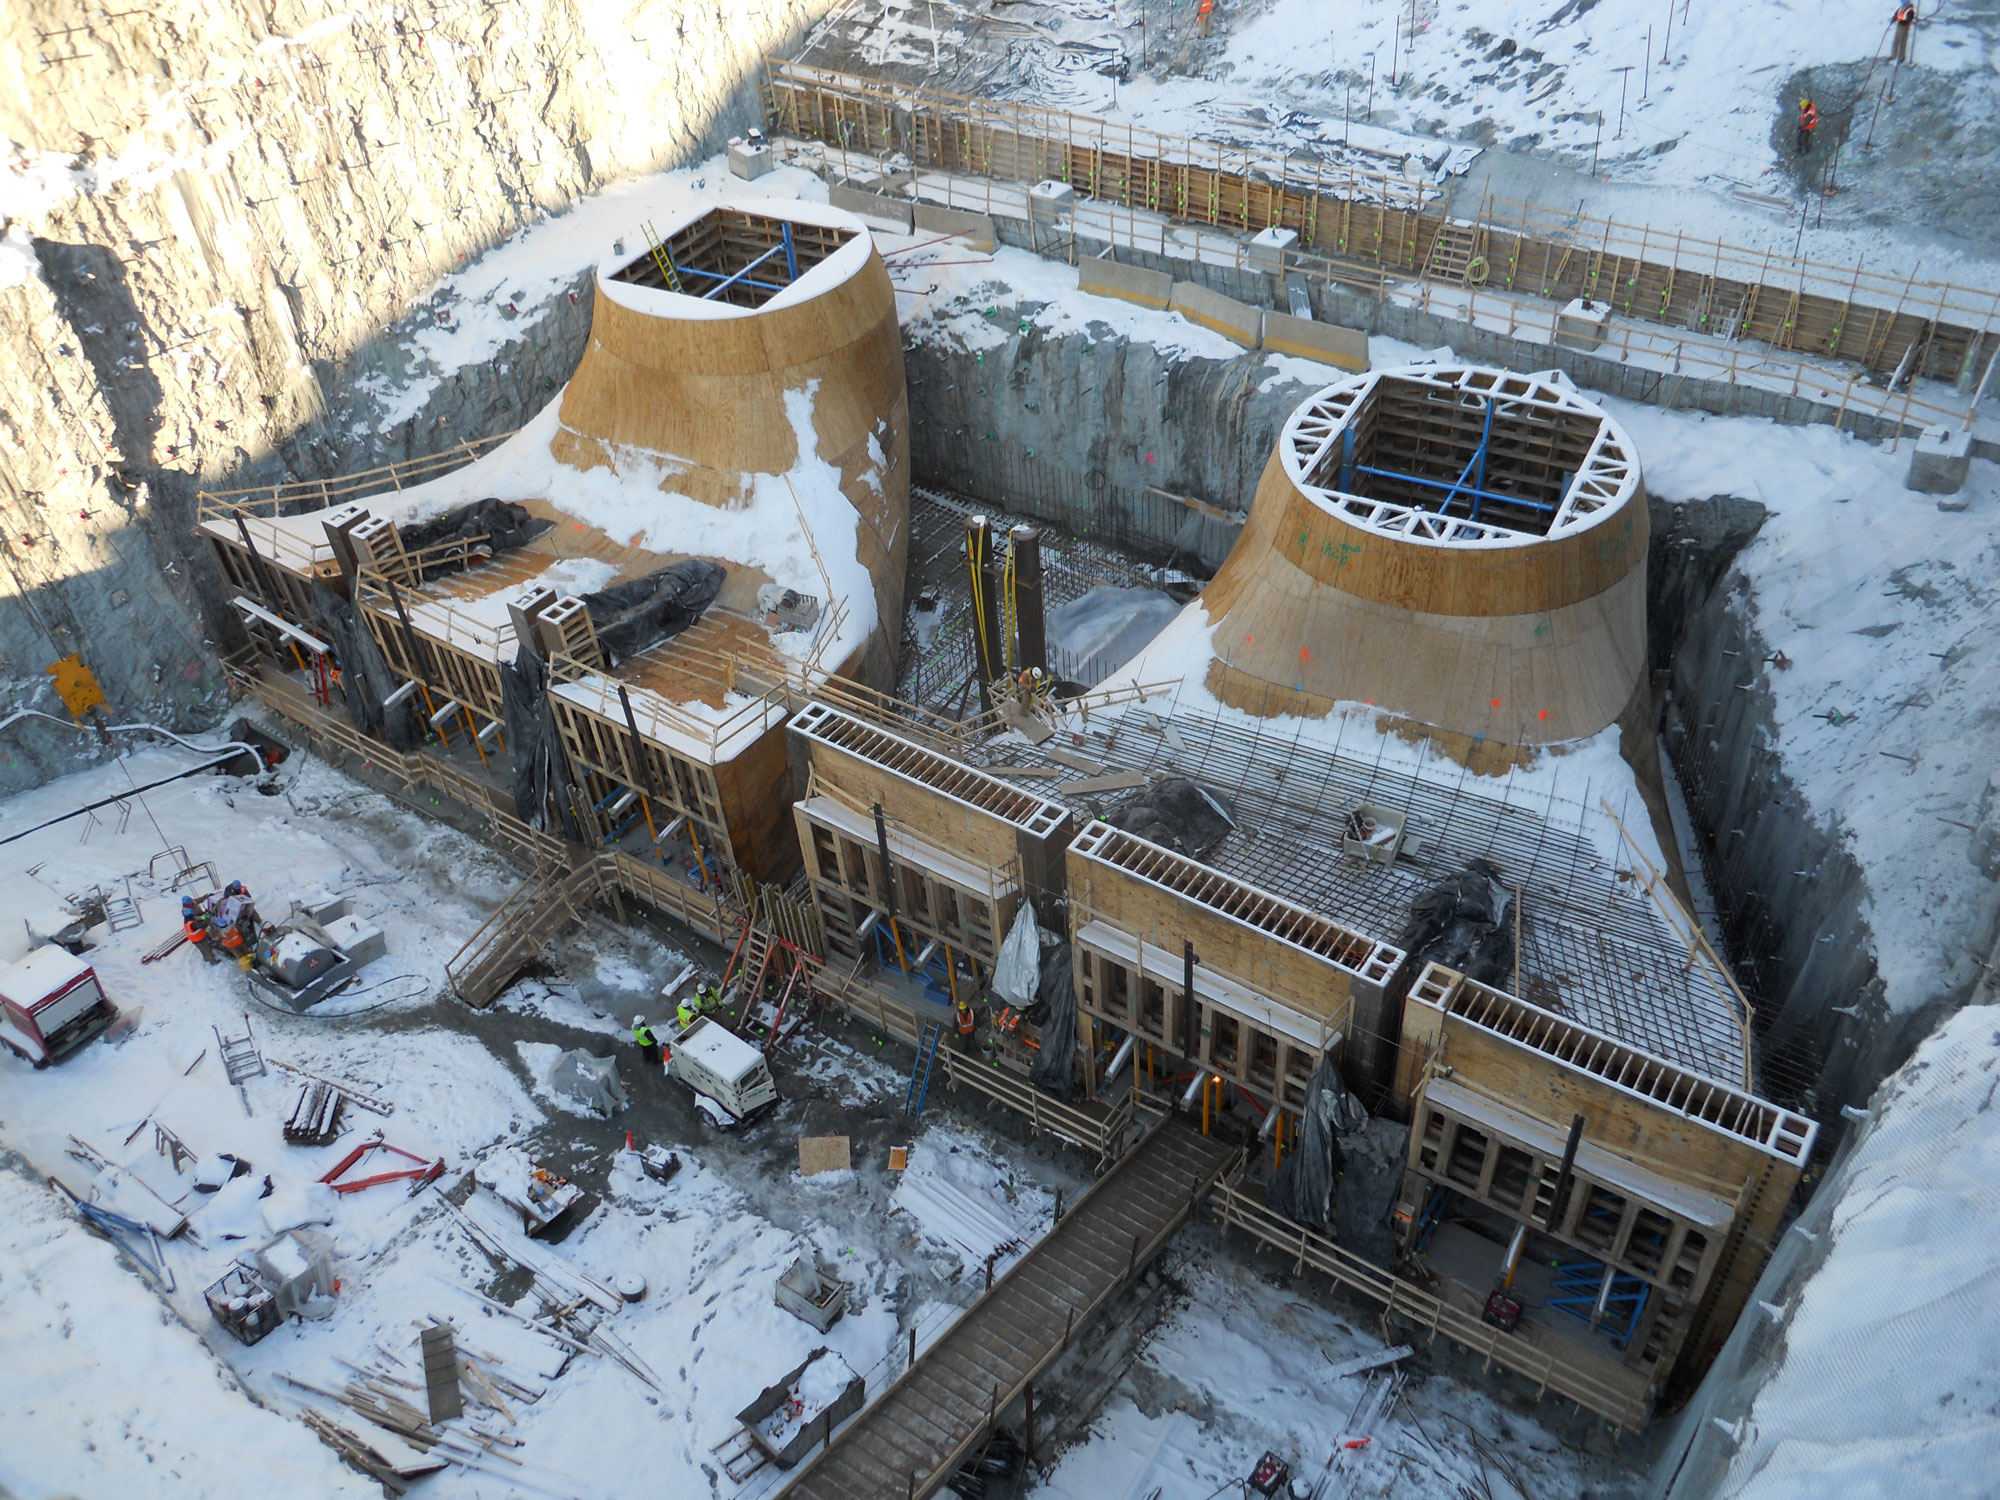 Holtwood Hydroelectric Project